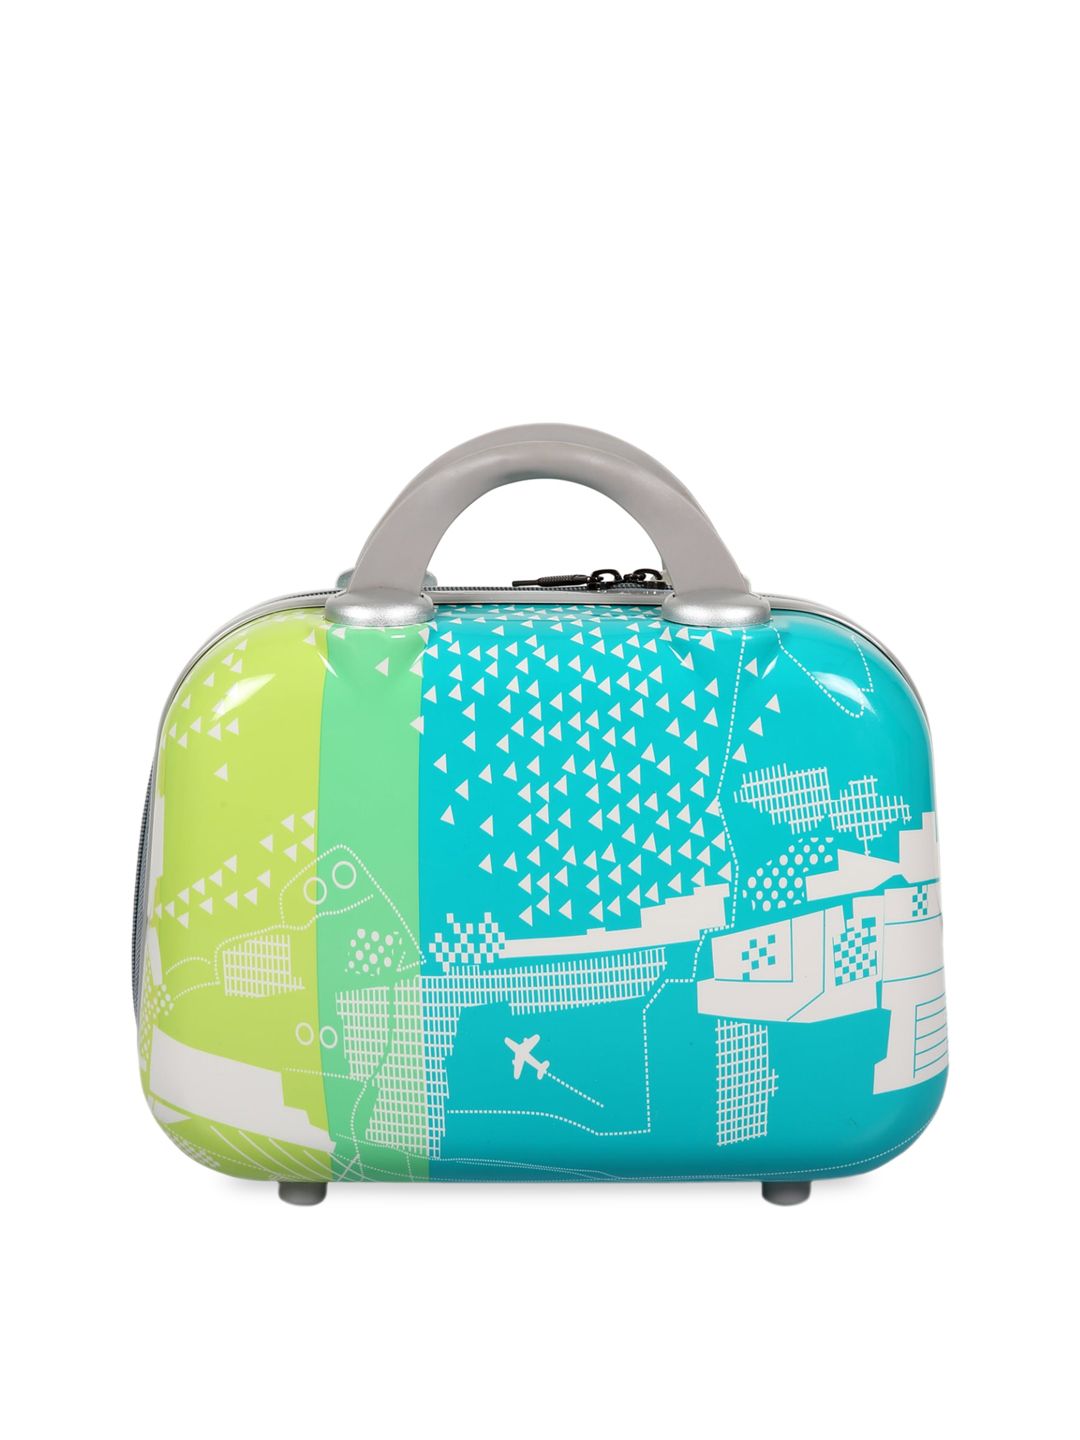 Polo Class Green Travel Small Vanity Bag Price in India